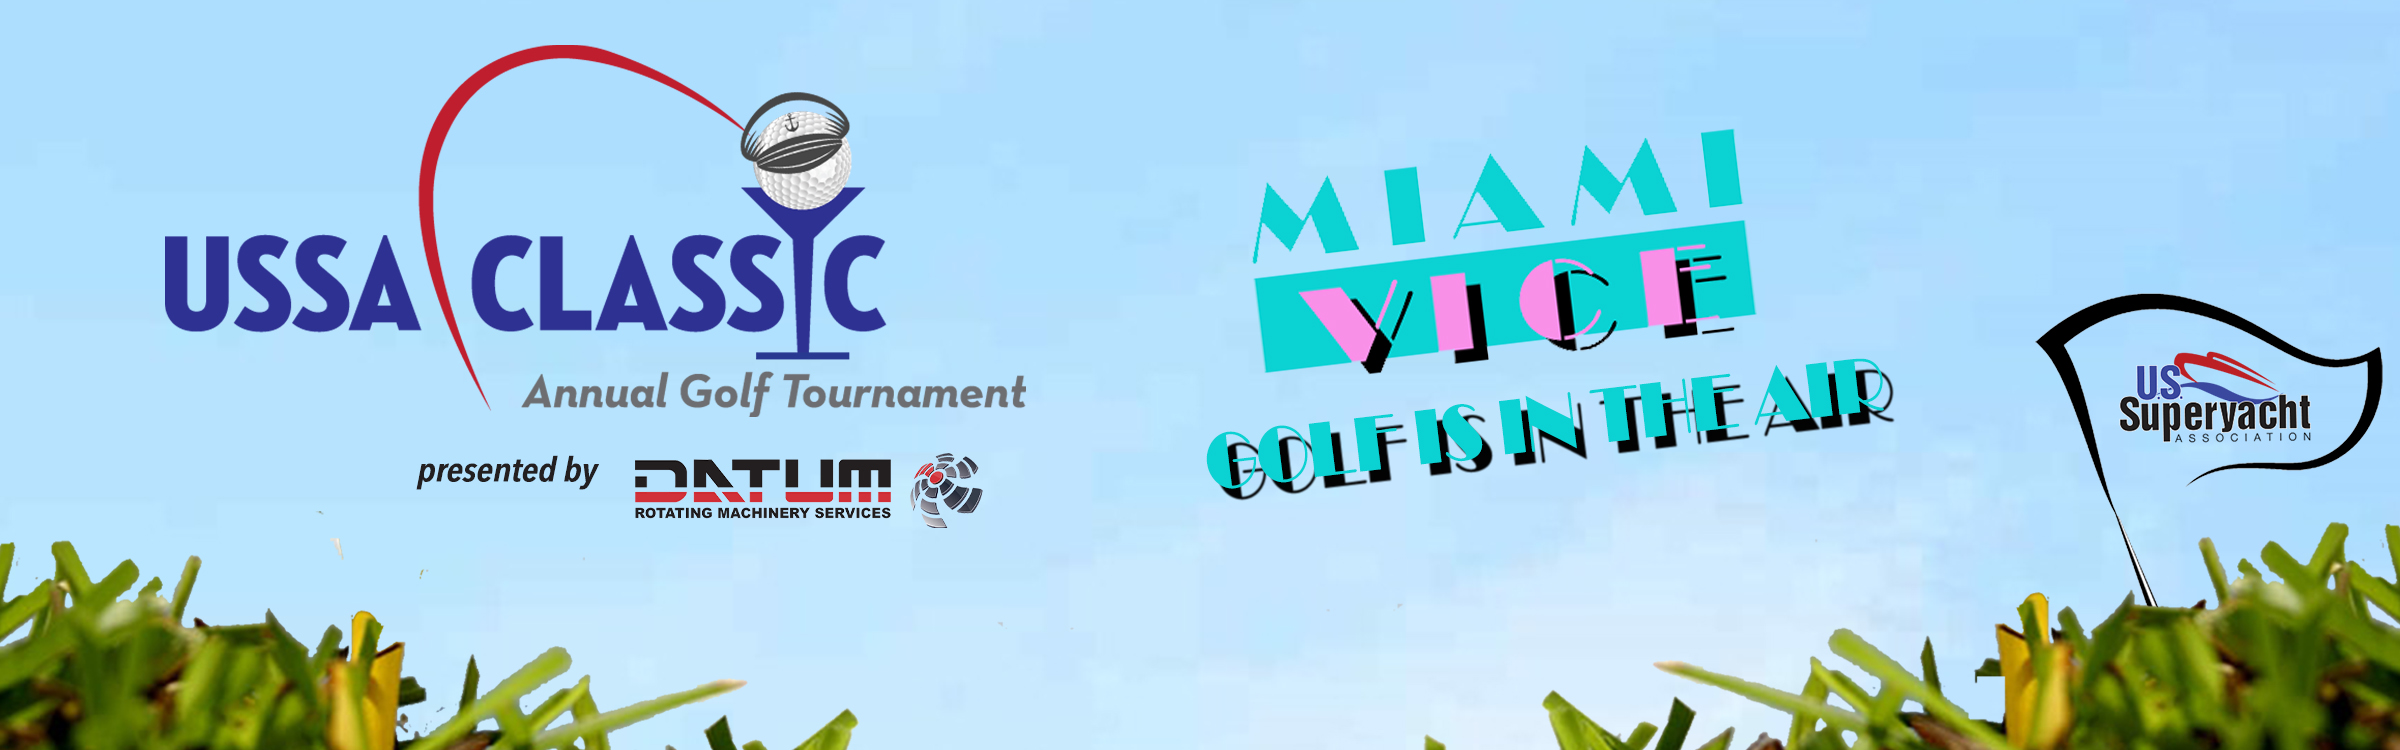 Golf Classic Header with logo and Miami vice logo